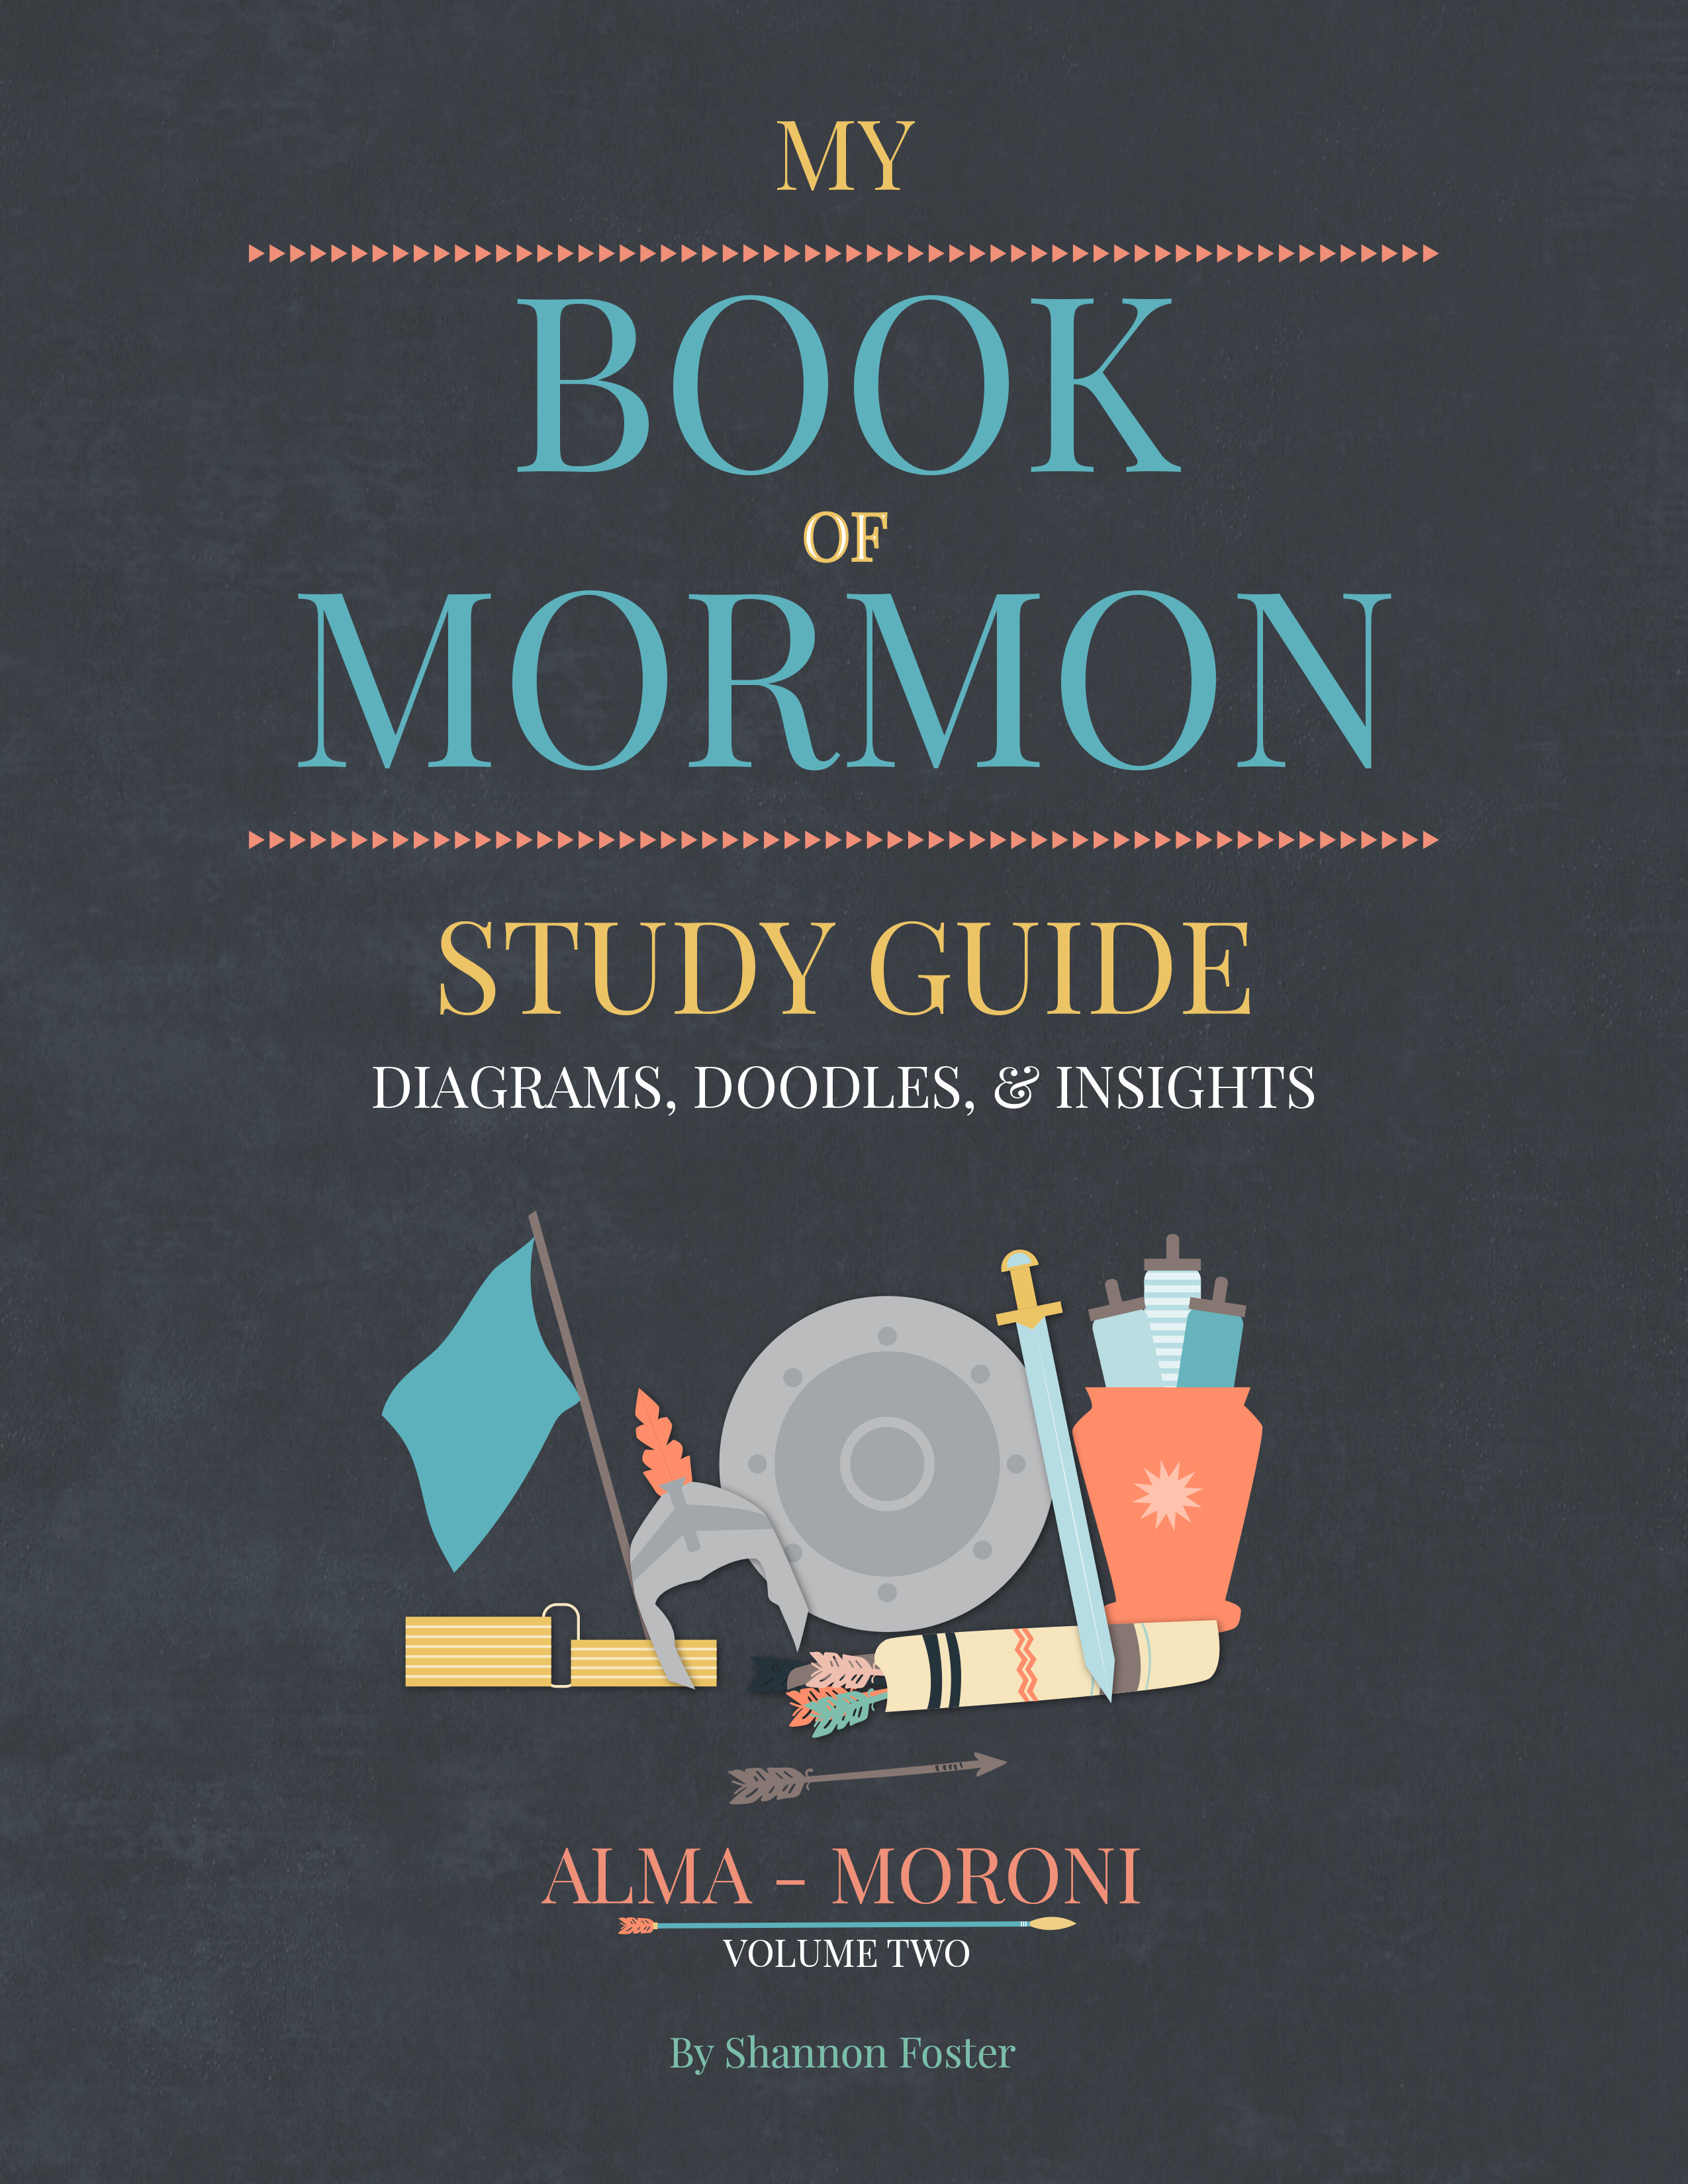 Book-of-Mormon-Study-guide-Diagrams-Doodles--Insights